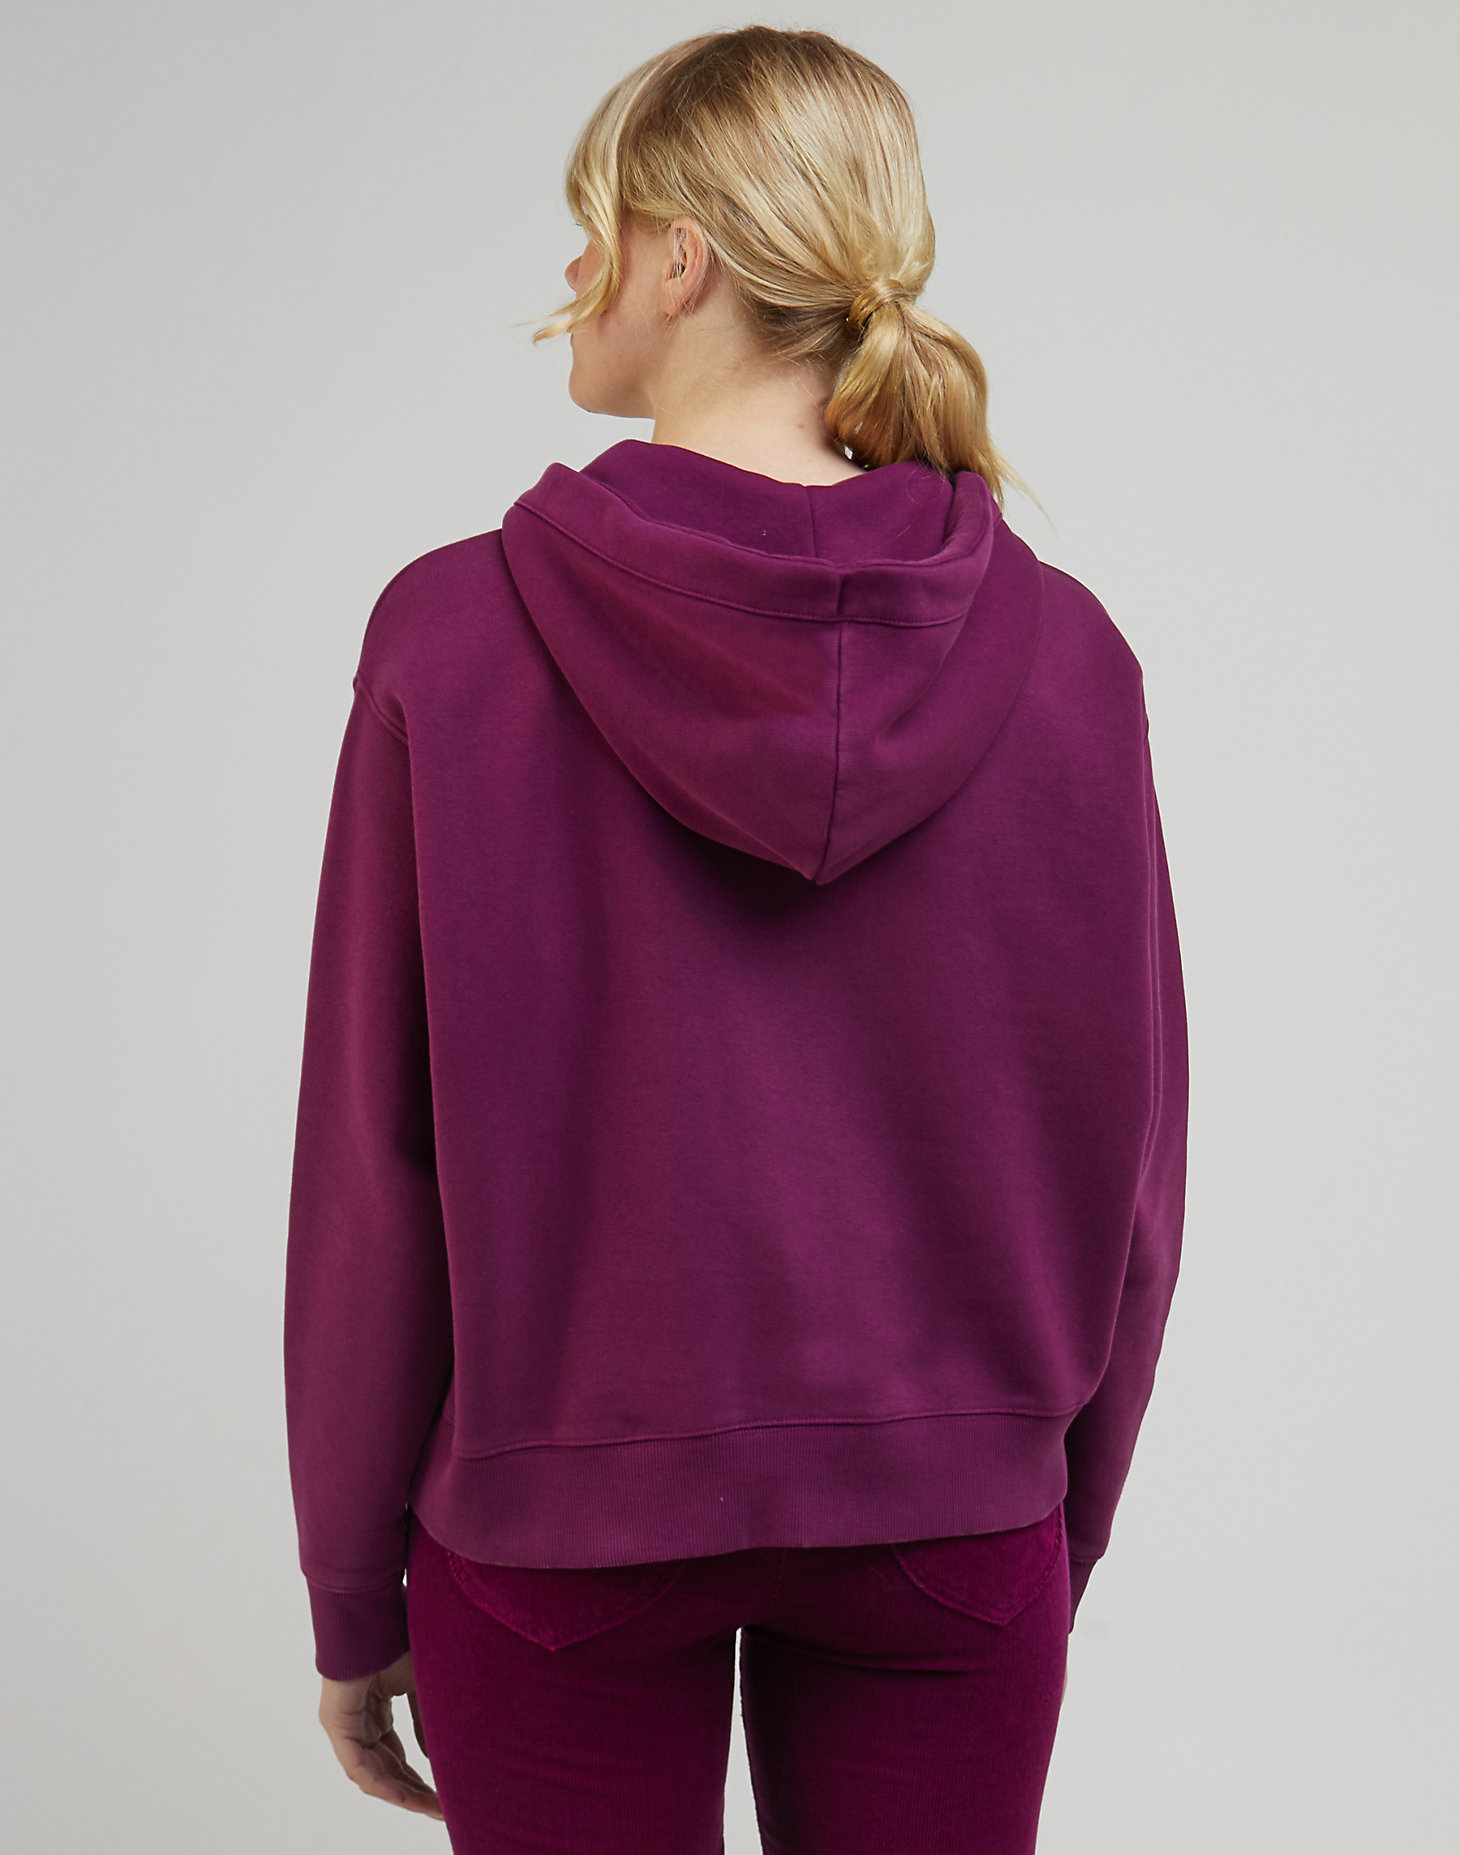 Relaxed Hoodie in Foxy Violet alternative view 1